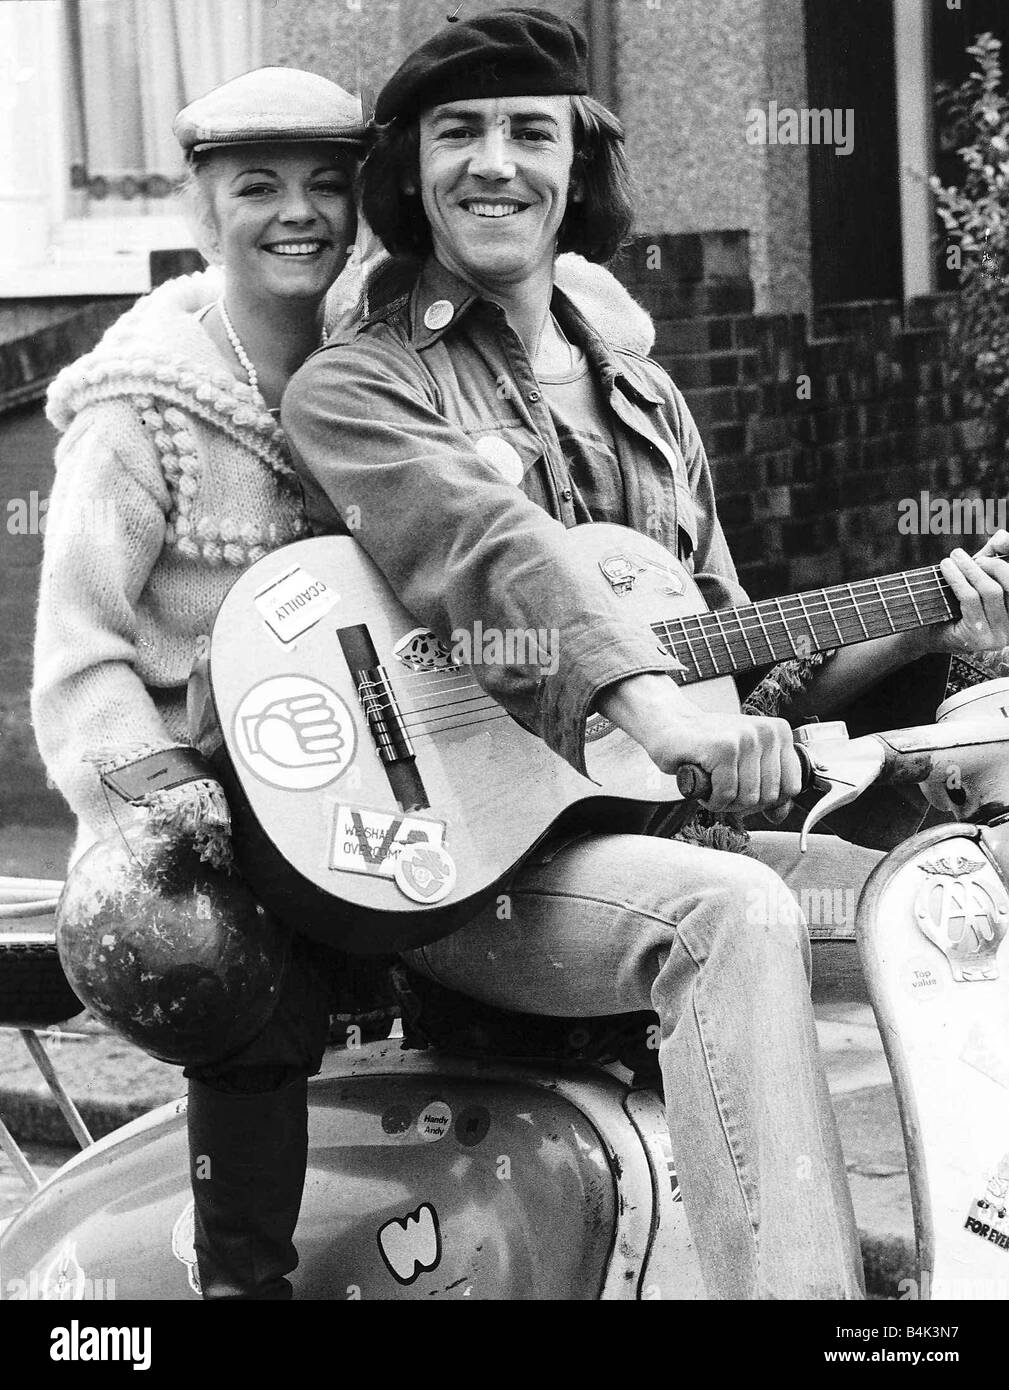 Robert Lindsay Actor October 1977 As Wolfie Citizen Smith sitting on a Motor Scooter holding a guitar with Cheryl Hall who plays his girlfriend in the BBC TV comedy series Citizen Smith dbase Stock Photo